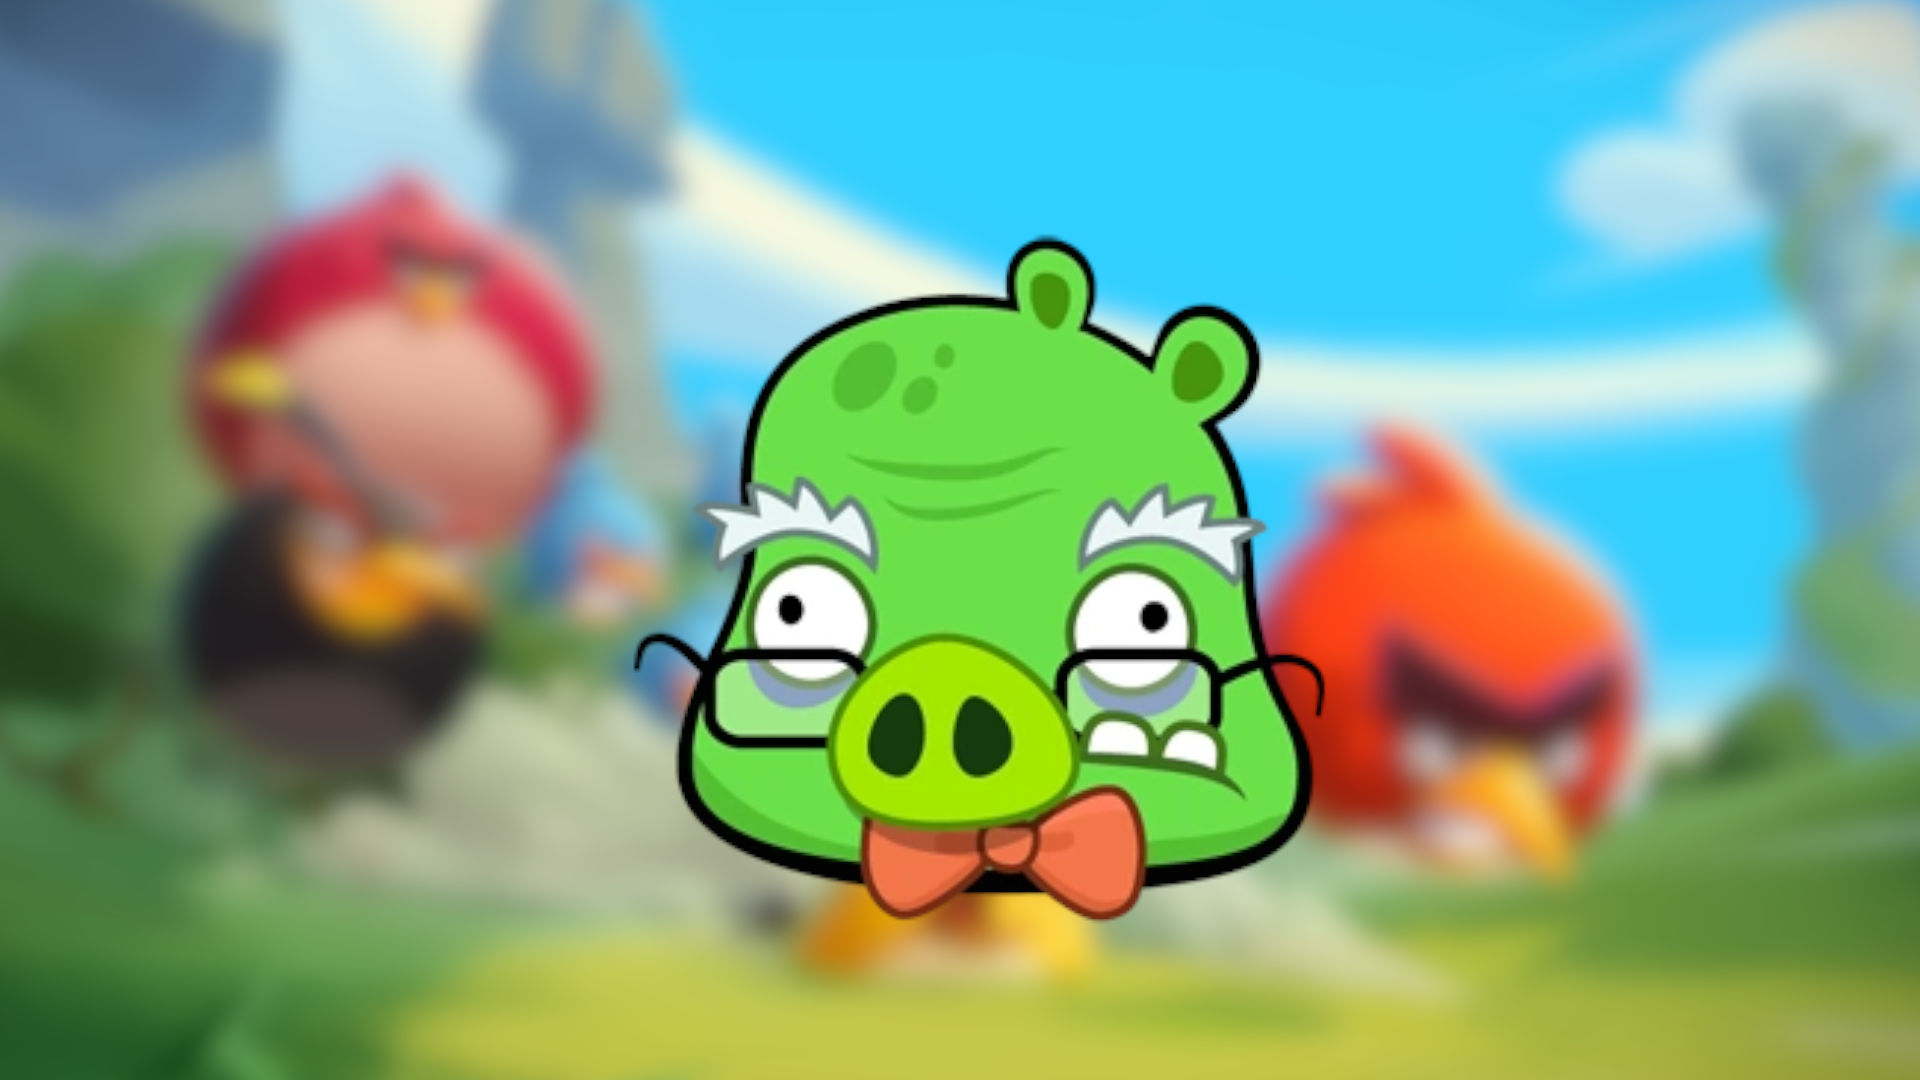 Angry Birds character Professor Pig